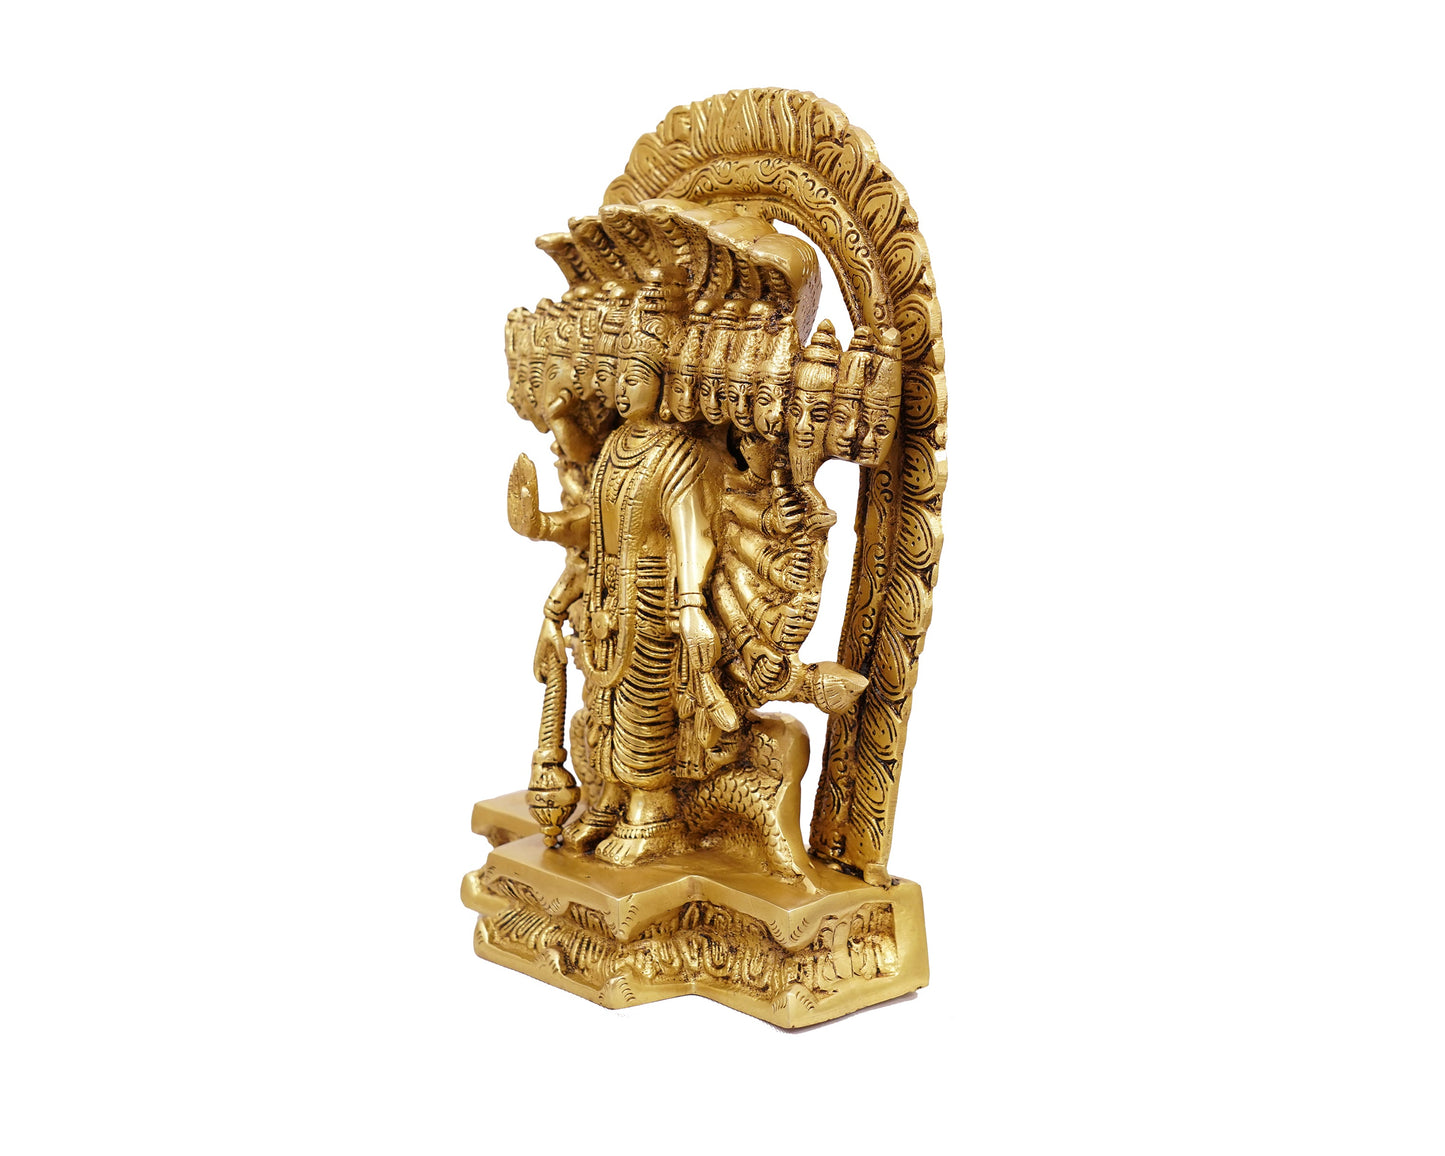 Lord Vishnu Idol Brass Statue with ten Heads for Puja, Home Mandirs, Gifts by Pooja Bazar 4 X 11 X 6.5 In